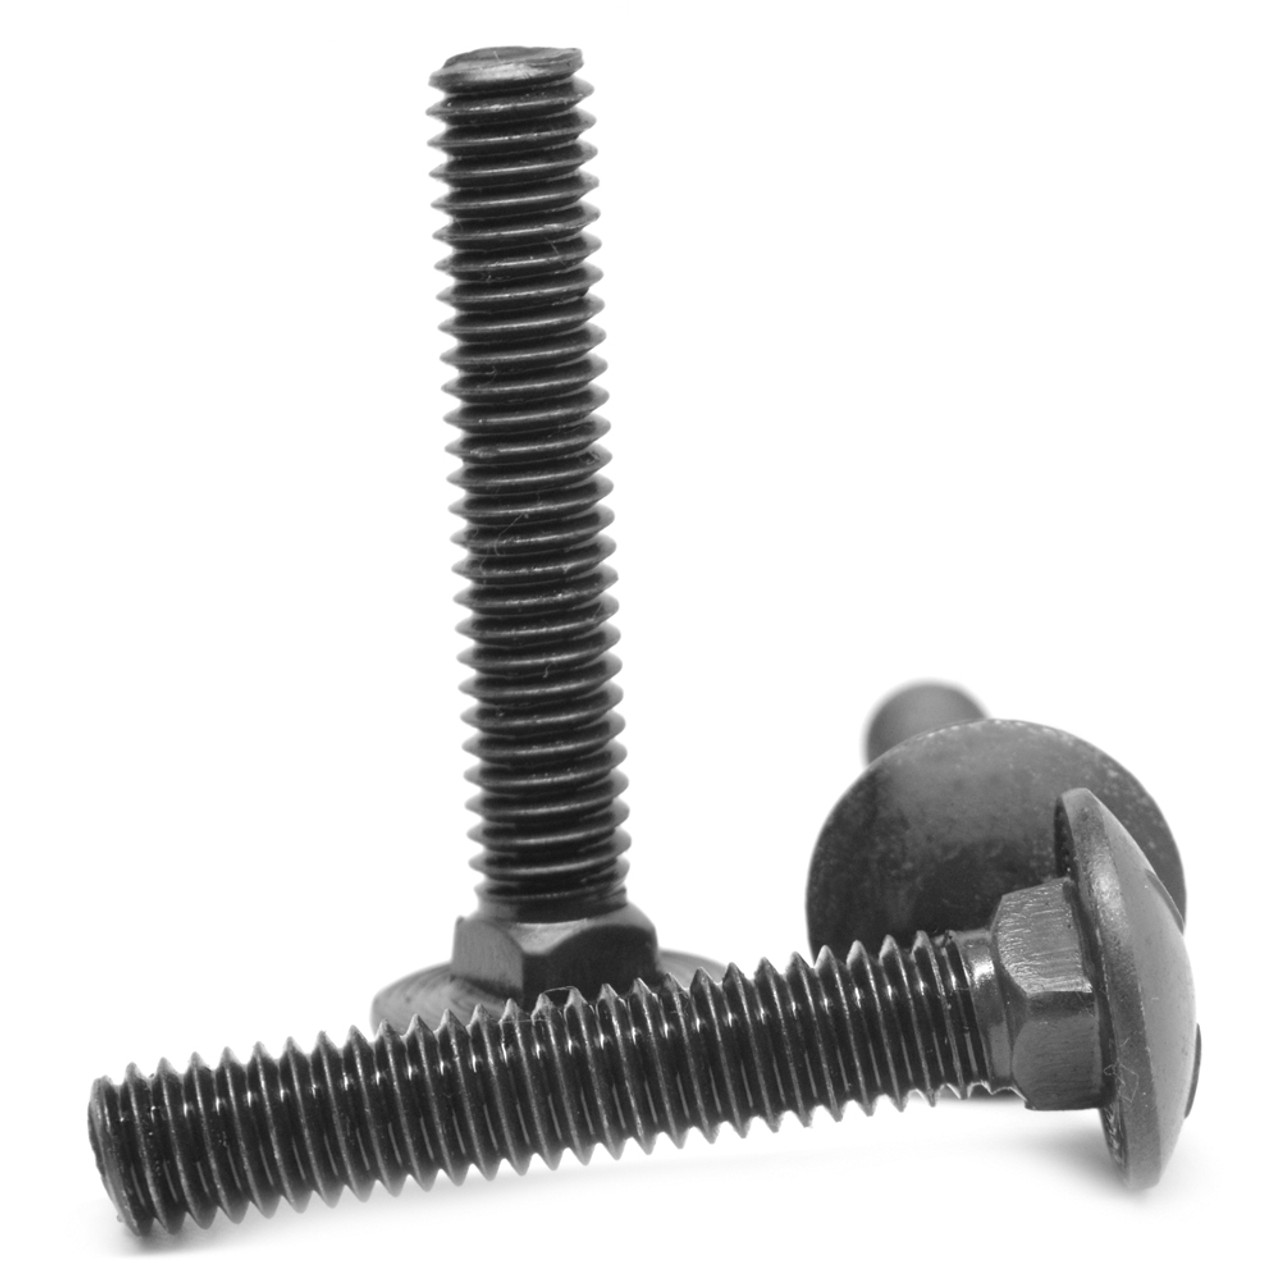 10 5/16-18x3/4 Stainless Steel Carriage Bolts Coarse Thread round Head Screw